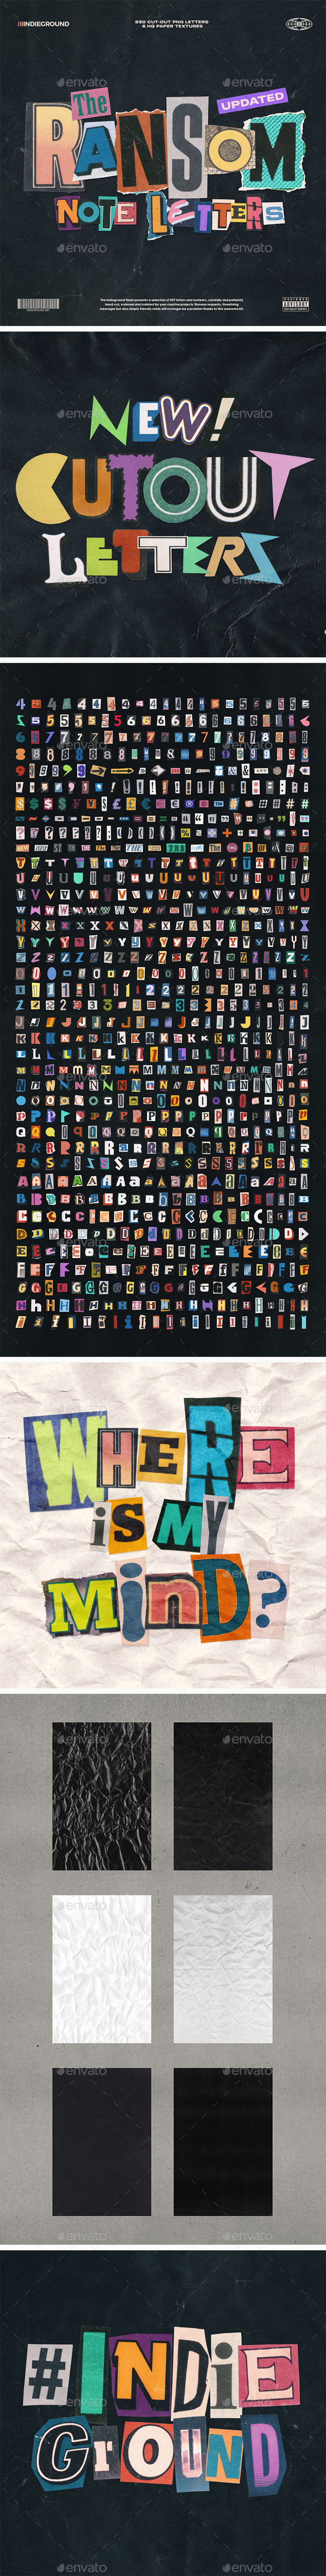 Ransom Note Letters